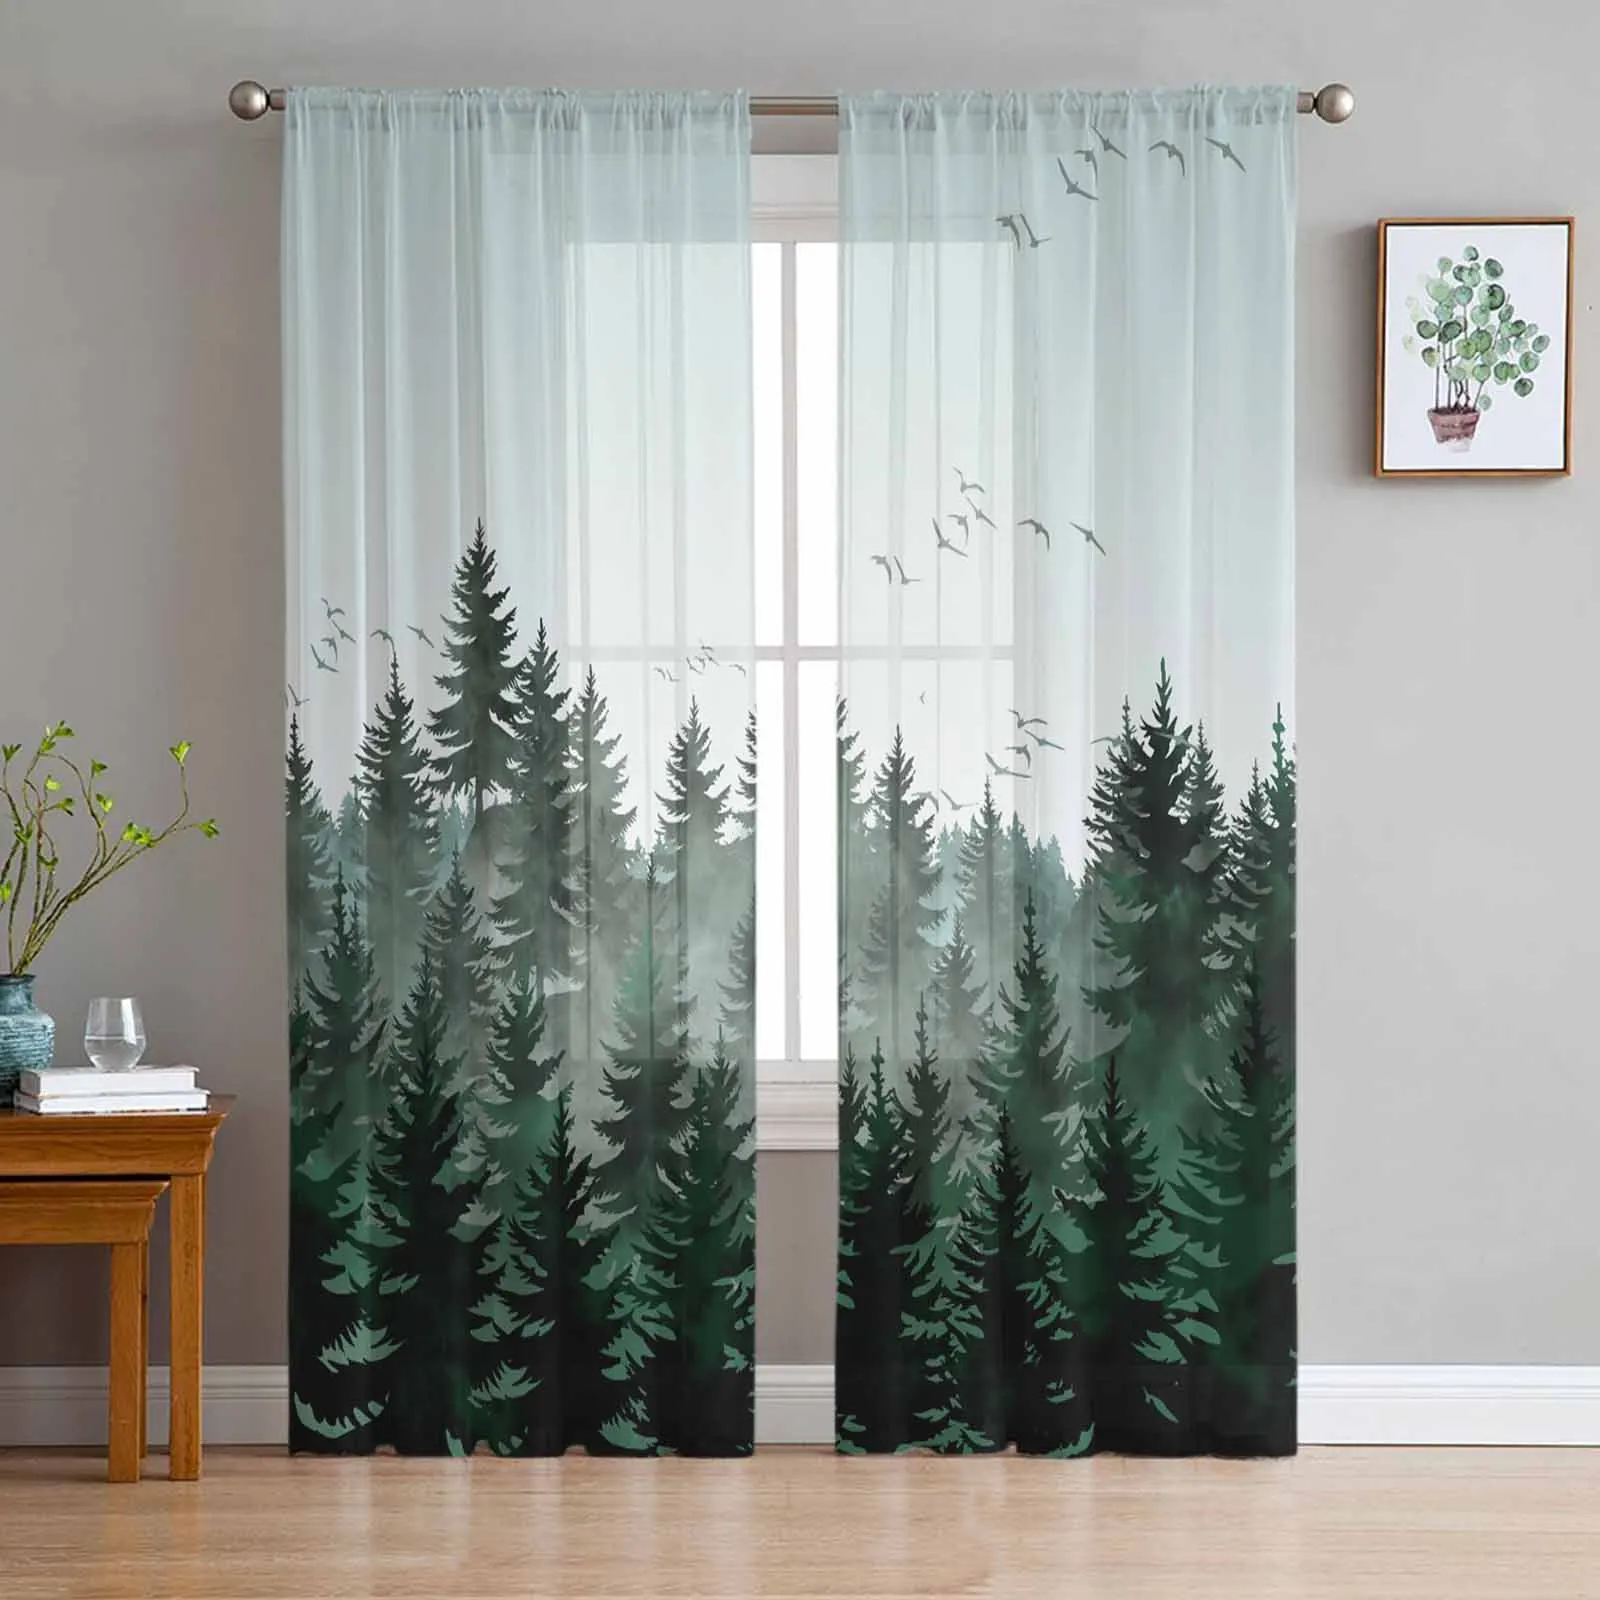 

Watercolor Forest Bird Dark Green Sheer Curtains for Living Room Modern Home Decor Tulle Curtain Bedroom Voile Drapes